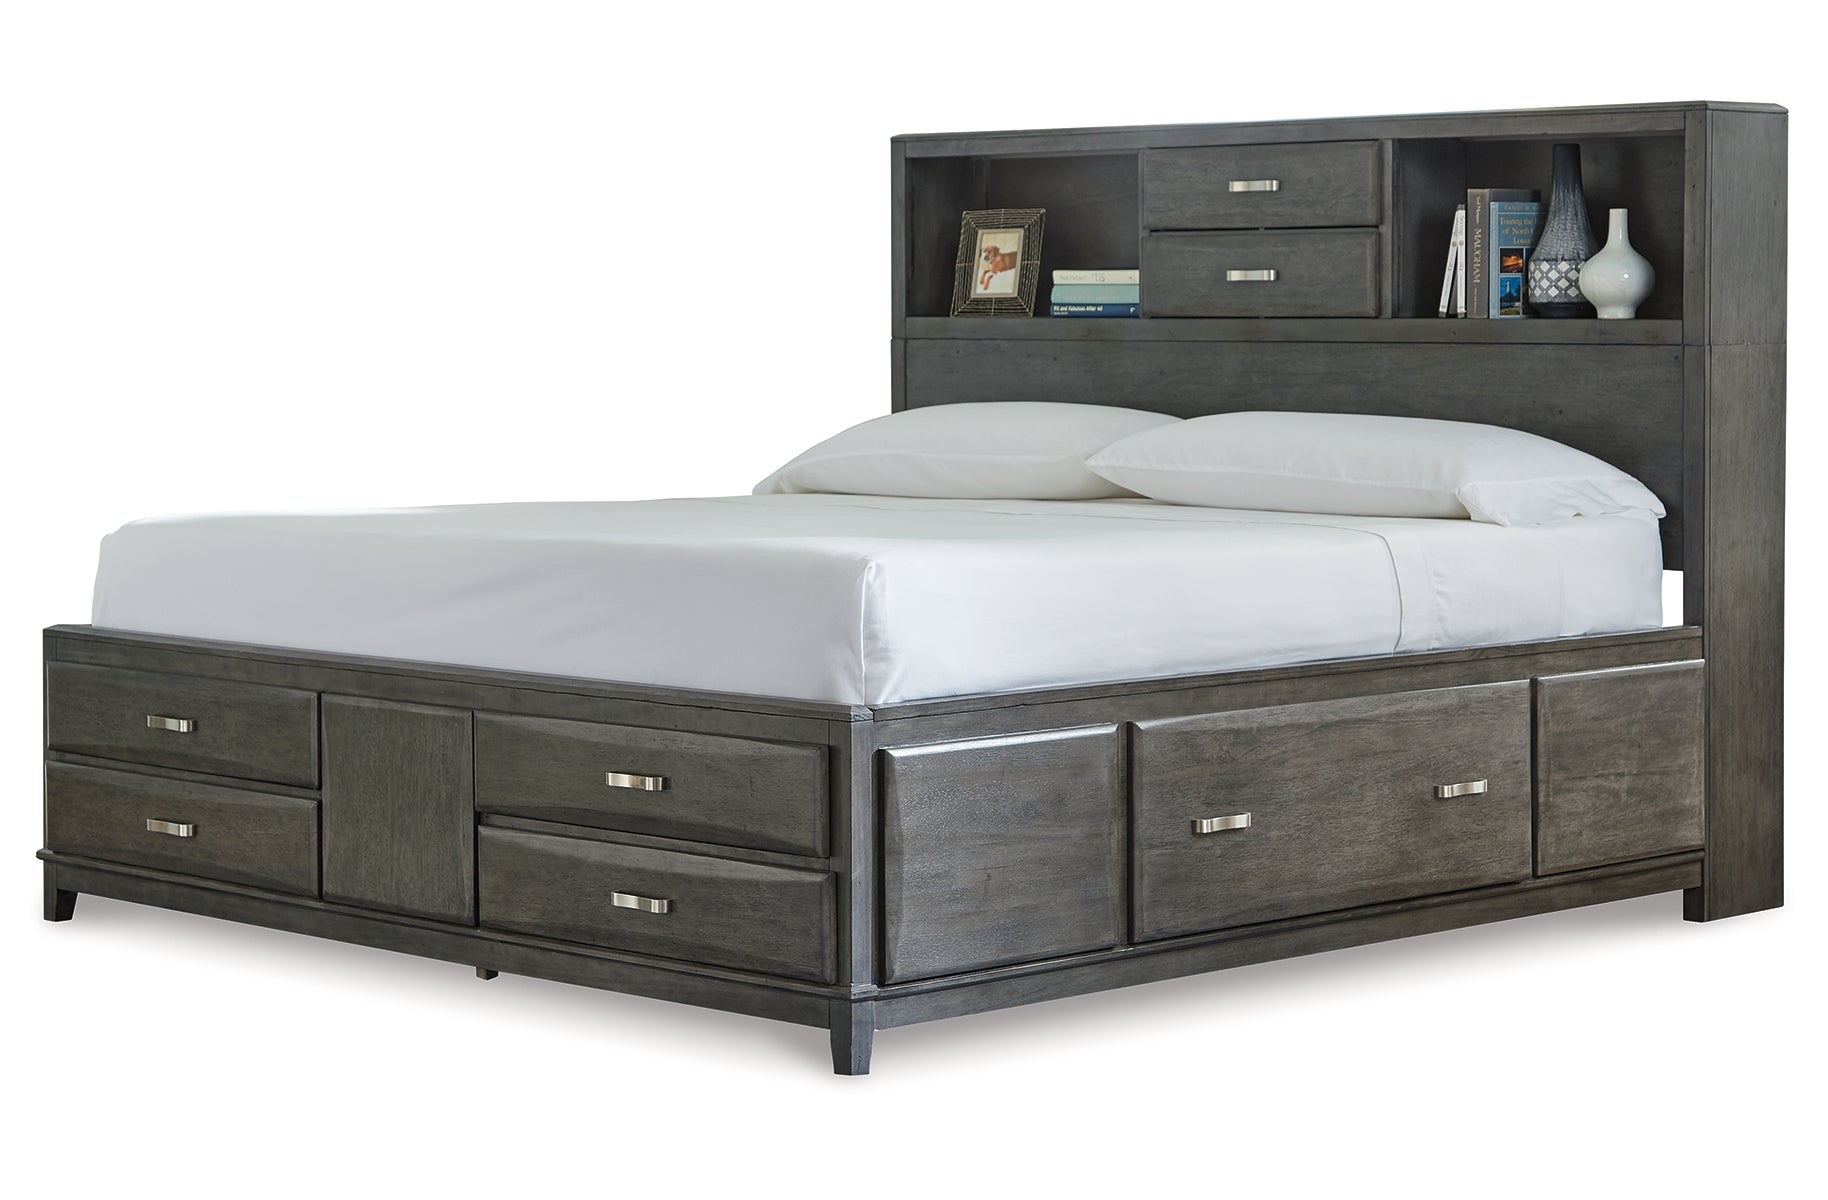 Caitbrook California King Storage Bed with 8 Storage Drawers with Mirrored Dresser, Chest and Nightstand